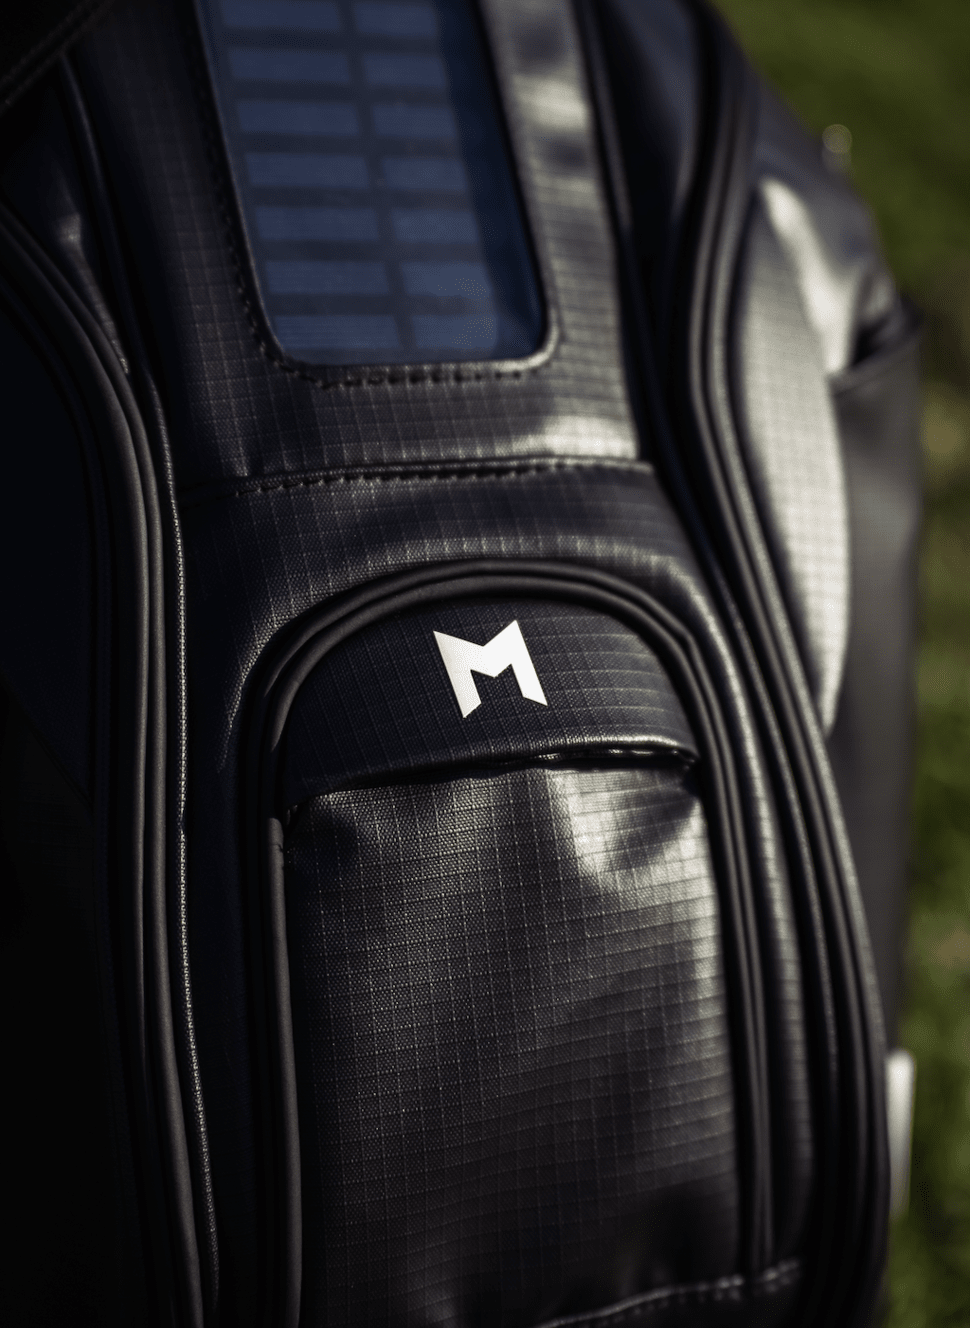 NEW MR1 SUSTAINABLE GOLF BAG